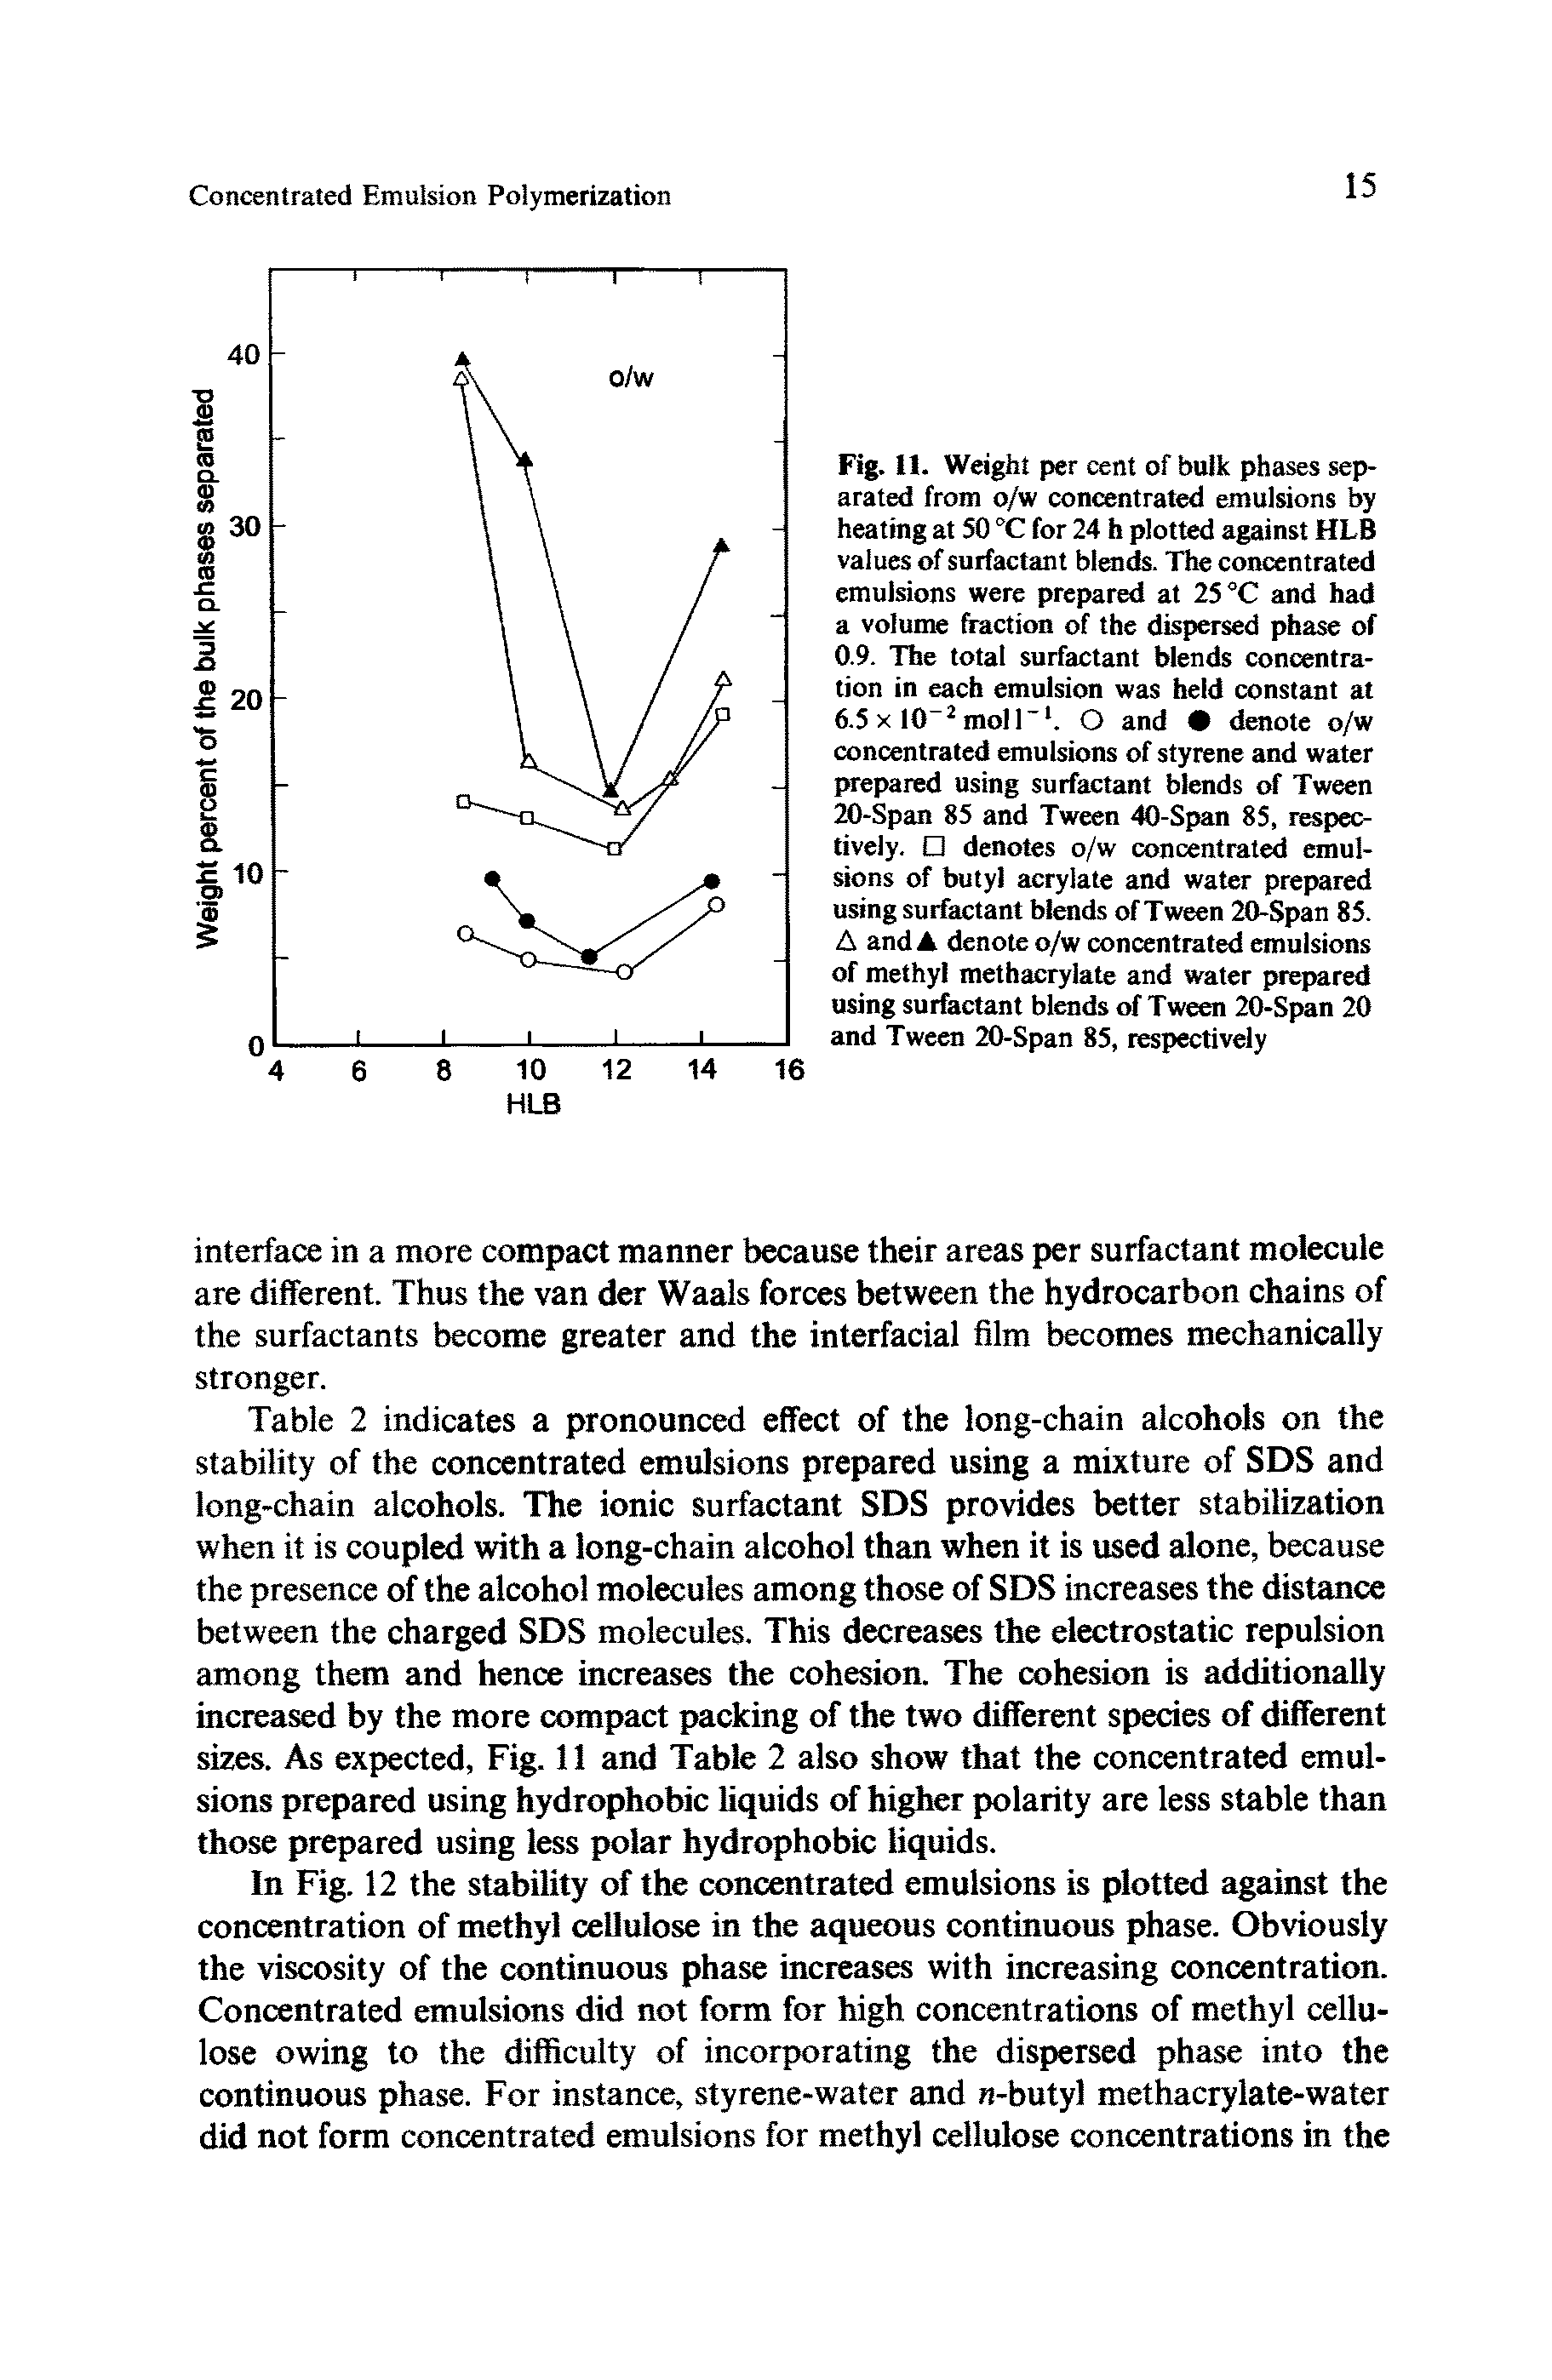 Fig. H. Weight per cent of bulk phases separated from o/w concentrated emulsions by heating at 50 °C for 24 h plotted against HLB values of surfactant blends. The concentrated emulsions were prepared at 25 °C and had a volume fraction of the dispersed phase of 0.9. The total surfactant blends concentration in each emulsion was held constant at 6.5 x 10 2 moll 1. O and denote o/w concentrated emulsions of styrene and water prepared using surfactant blends of Tween 20-Span 85 and Tween 40-Span 85, respectively. denotes o/w concentrated emulsions of butyl acrylate and water prepared using surfactant blends of Tween 20-Span 85. A and A denote o/w concentrated emulsions of methyl methacrylate and water prepared using surfactant blends of Tween 20-Span 20 and Tween 20-Span 85, respectively...